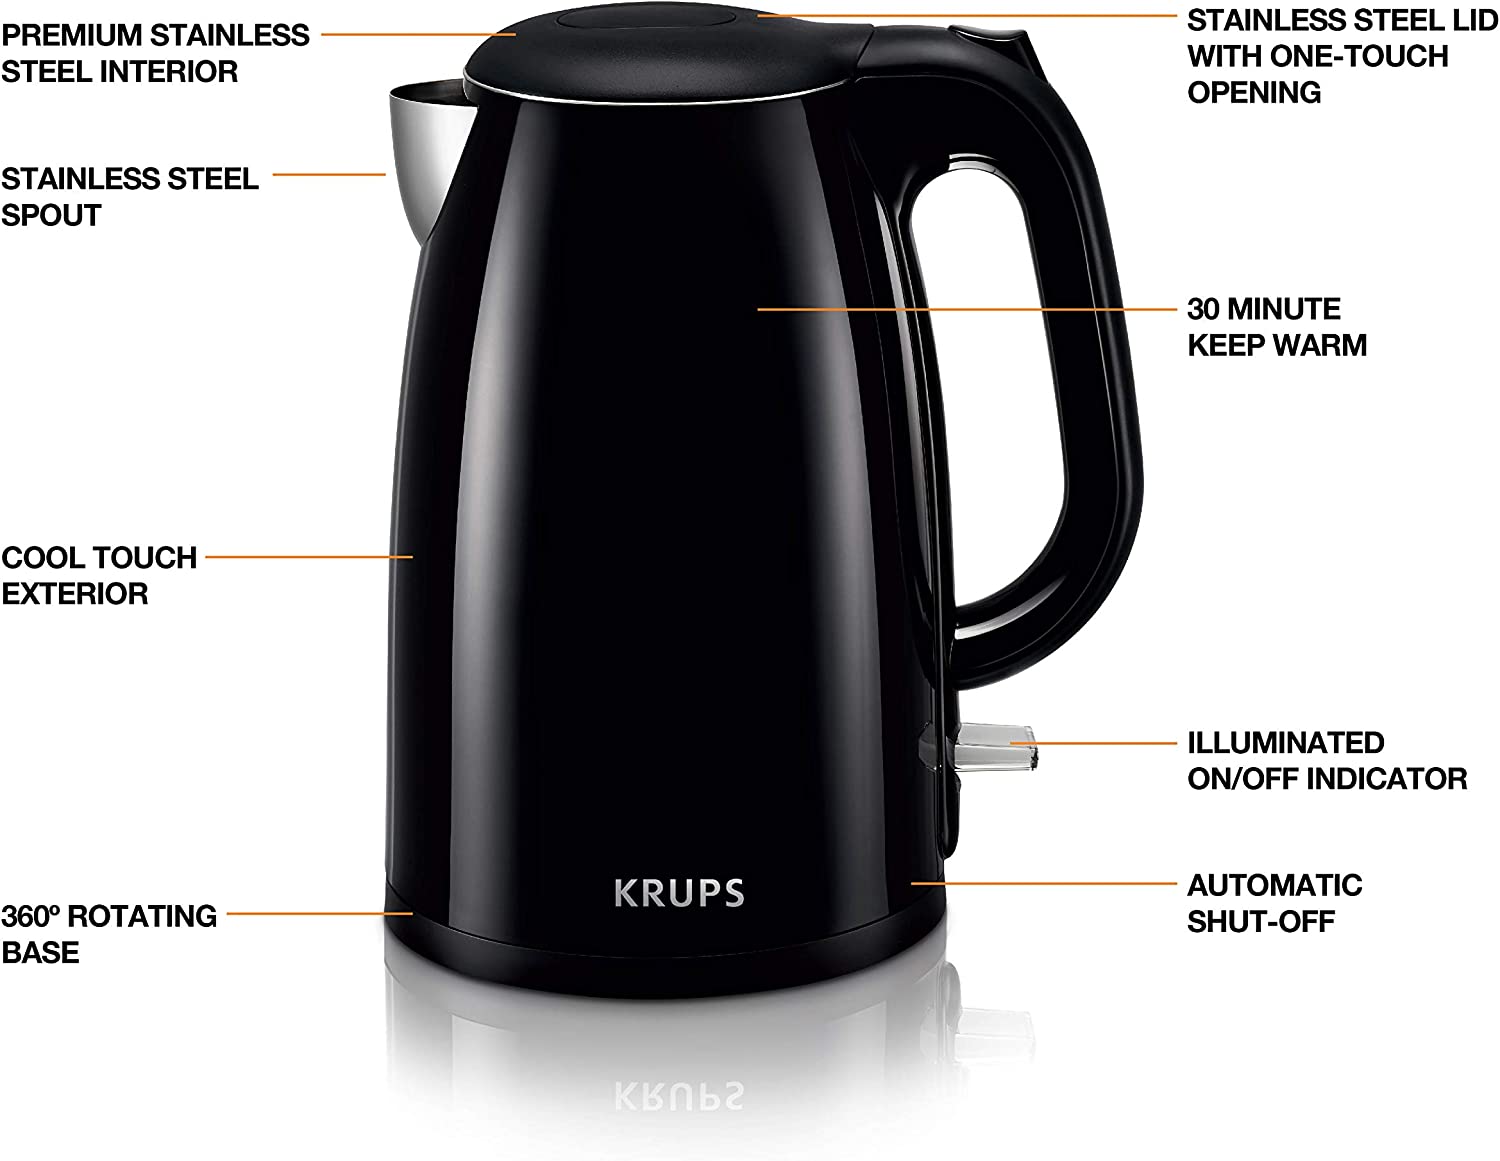 https://bigbigmart.com/wp-content/uploads/2023/07/Krups-Cool-Touch-Plastic-and-Stainless-Steel-Electric-Kettle-1.5-Liter-1500-Watts-Double-Wall-Fast-Boiling-Auto-Off-Keep-Warm-Cordless-Black1.jpg